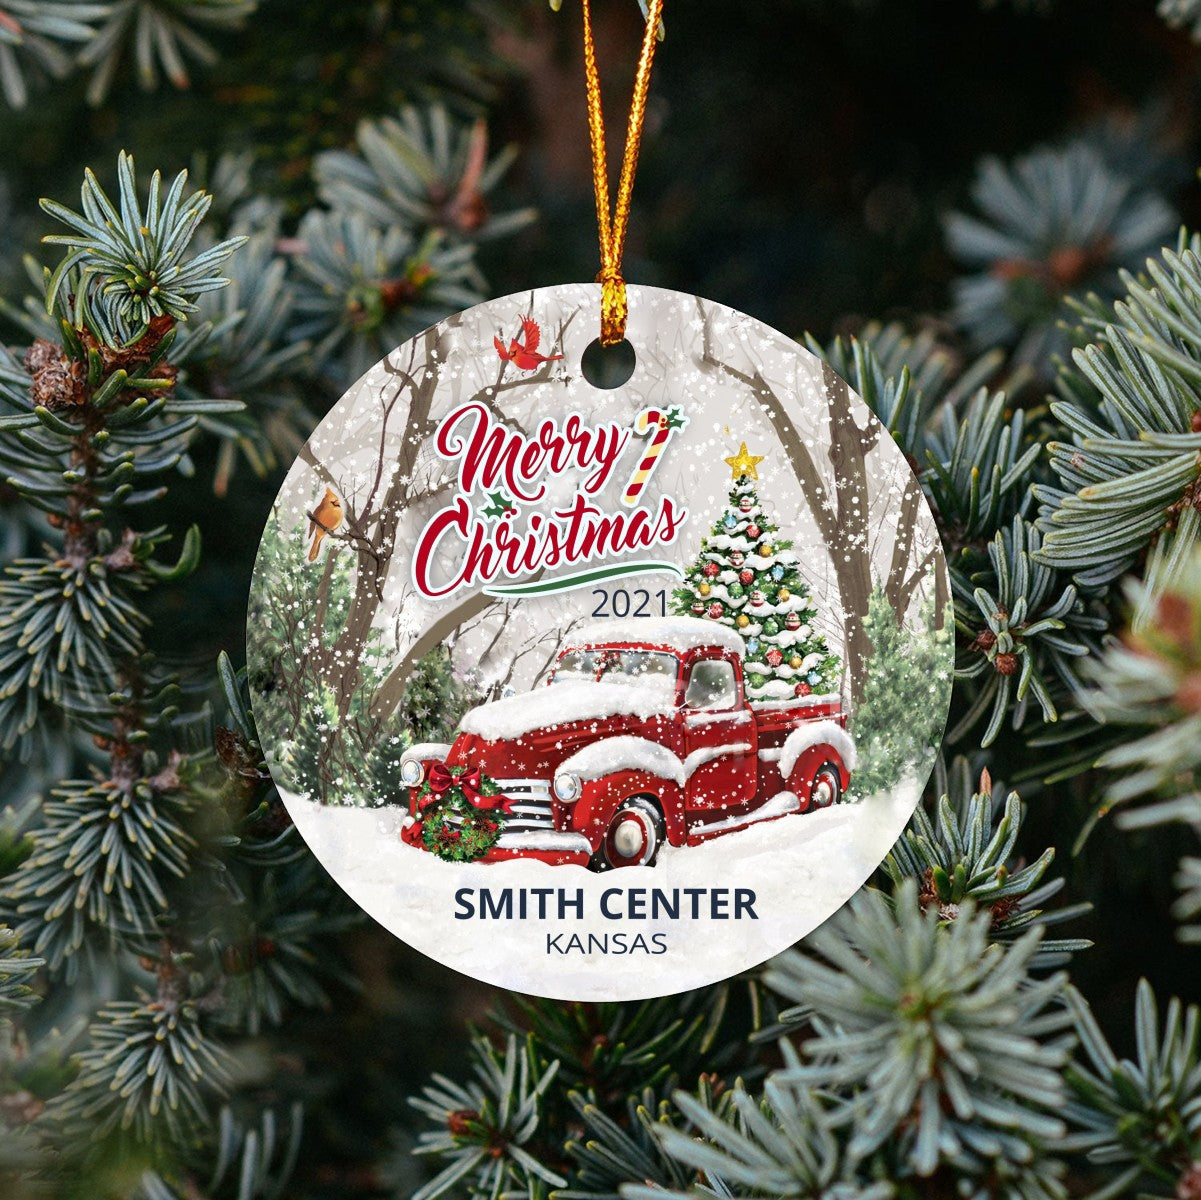 Christmas Tree Ornaments Smith Center - Ornament With Name City, State Smith Center Kansas KS Ornament - Red Truck Xmas Ornaments 3'' Plastic Gift For Family, Friend And Housewarming